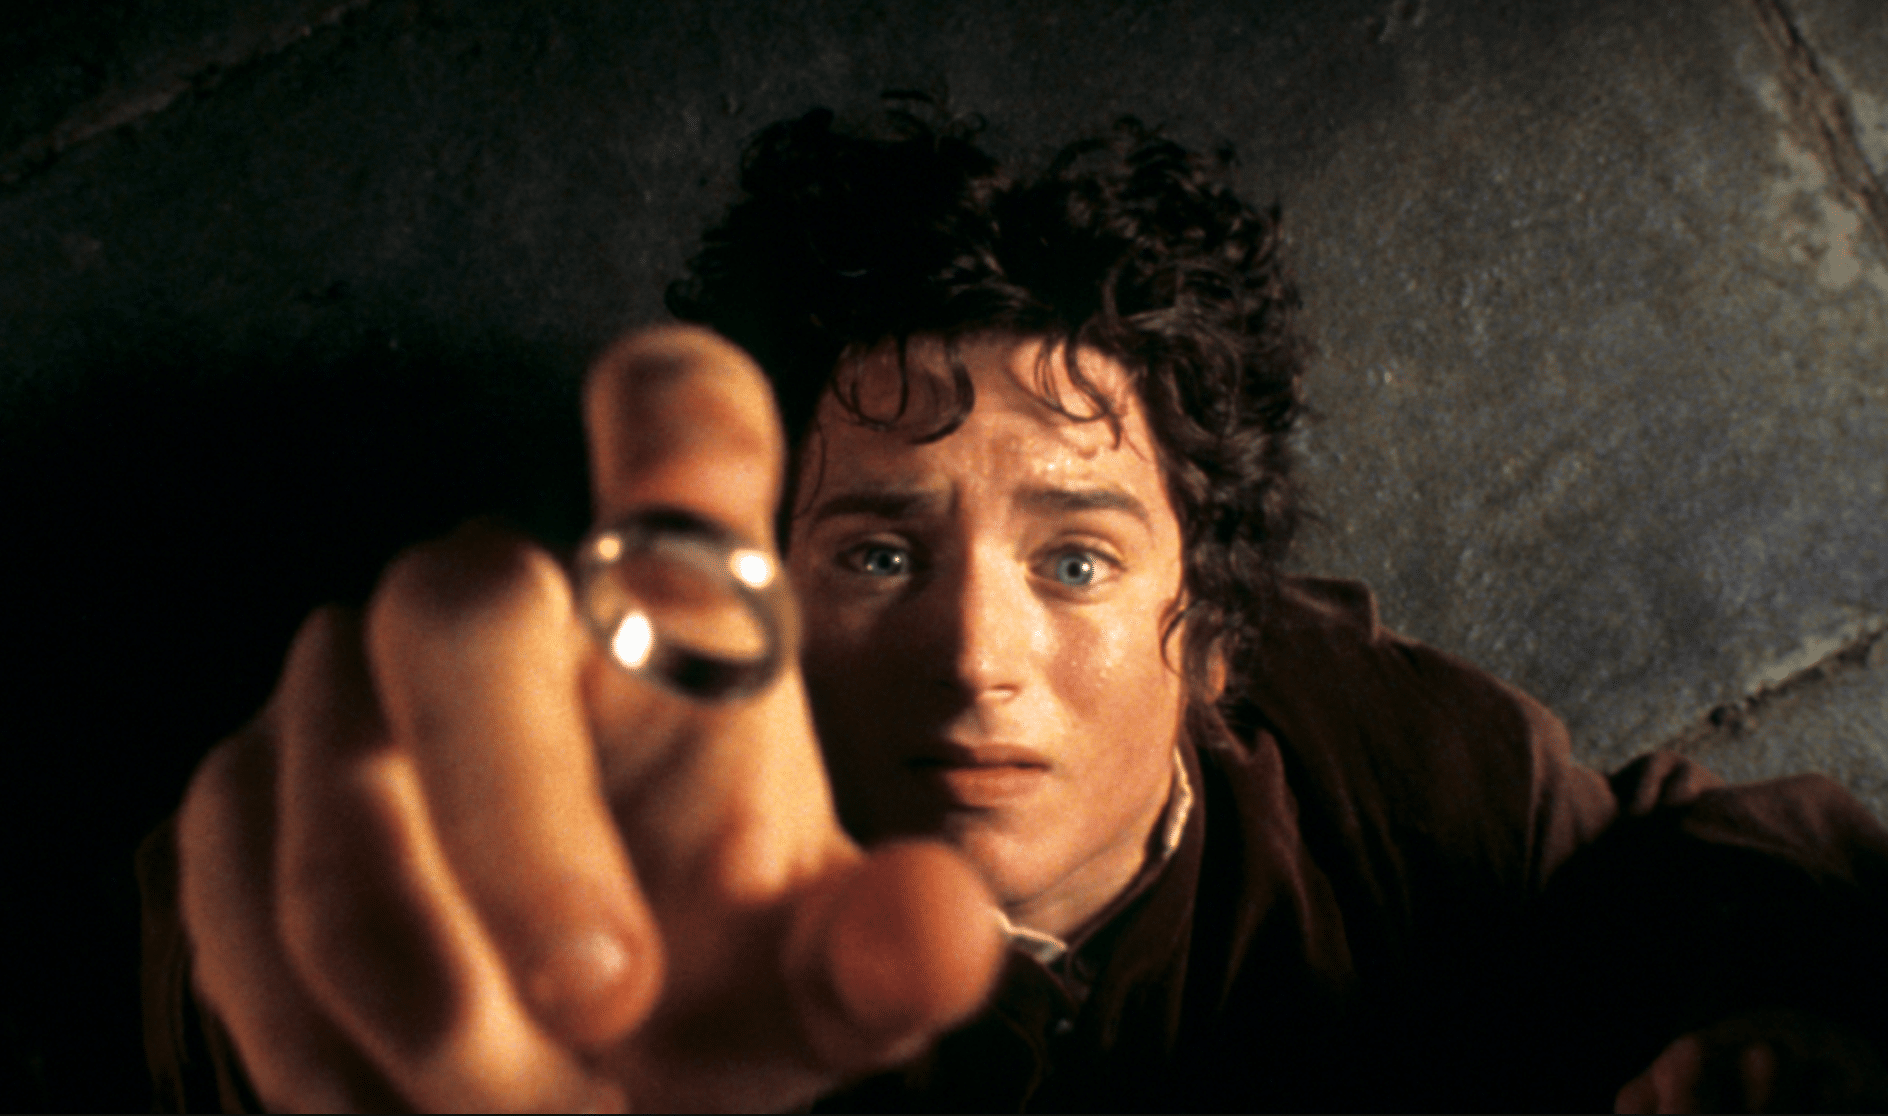 15 Films To Watch If You Like The Lord Of The Rings (Other Than